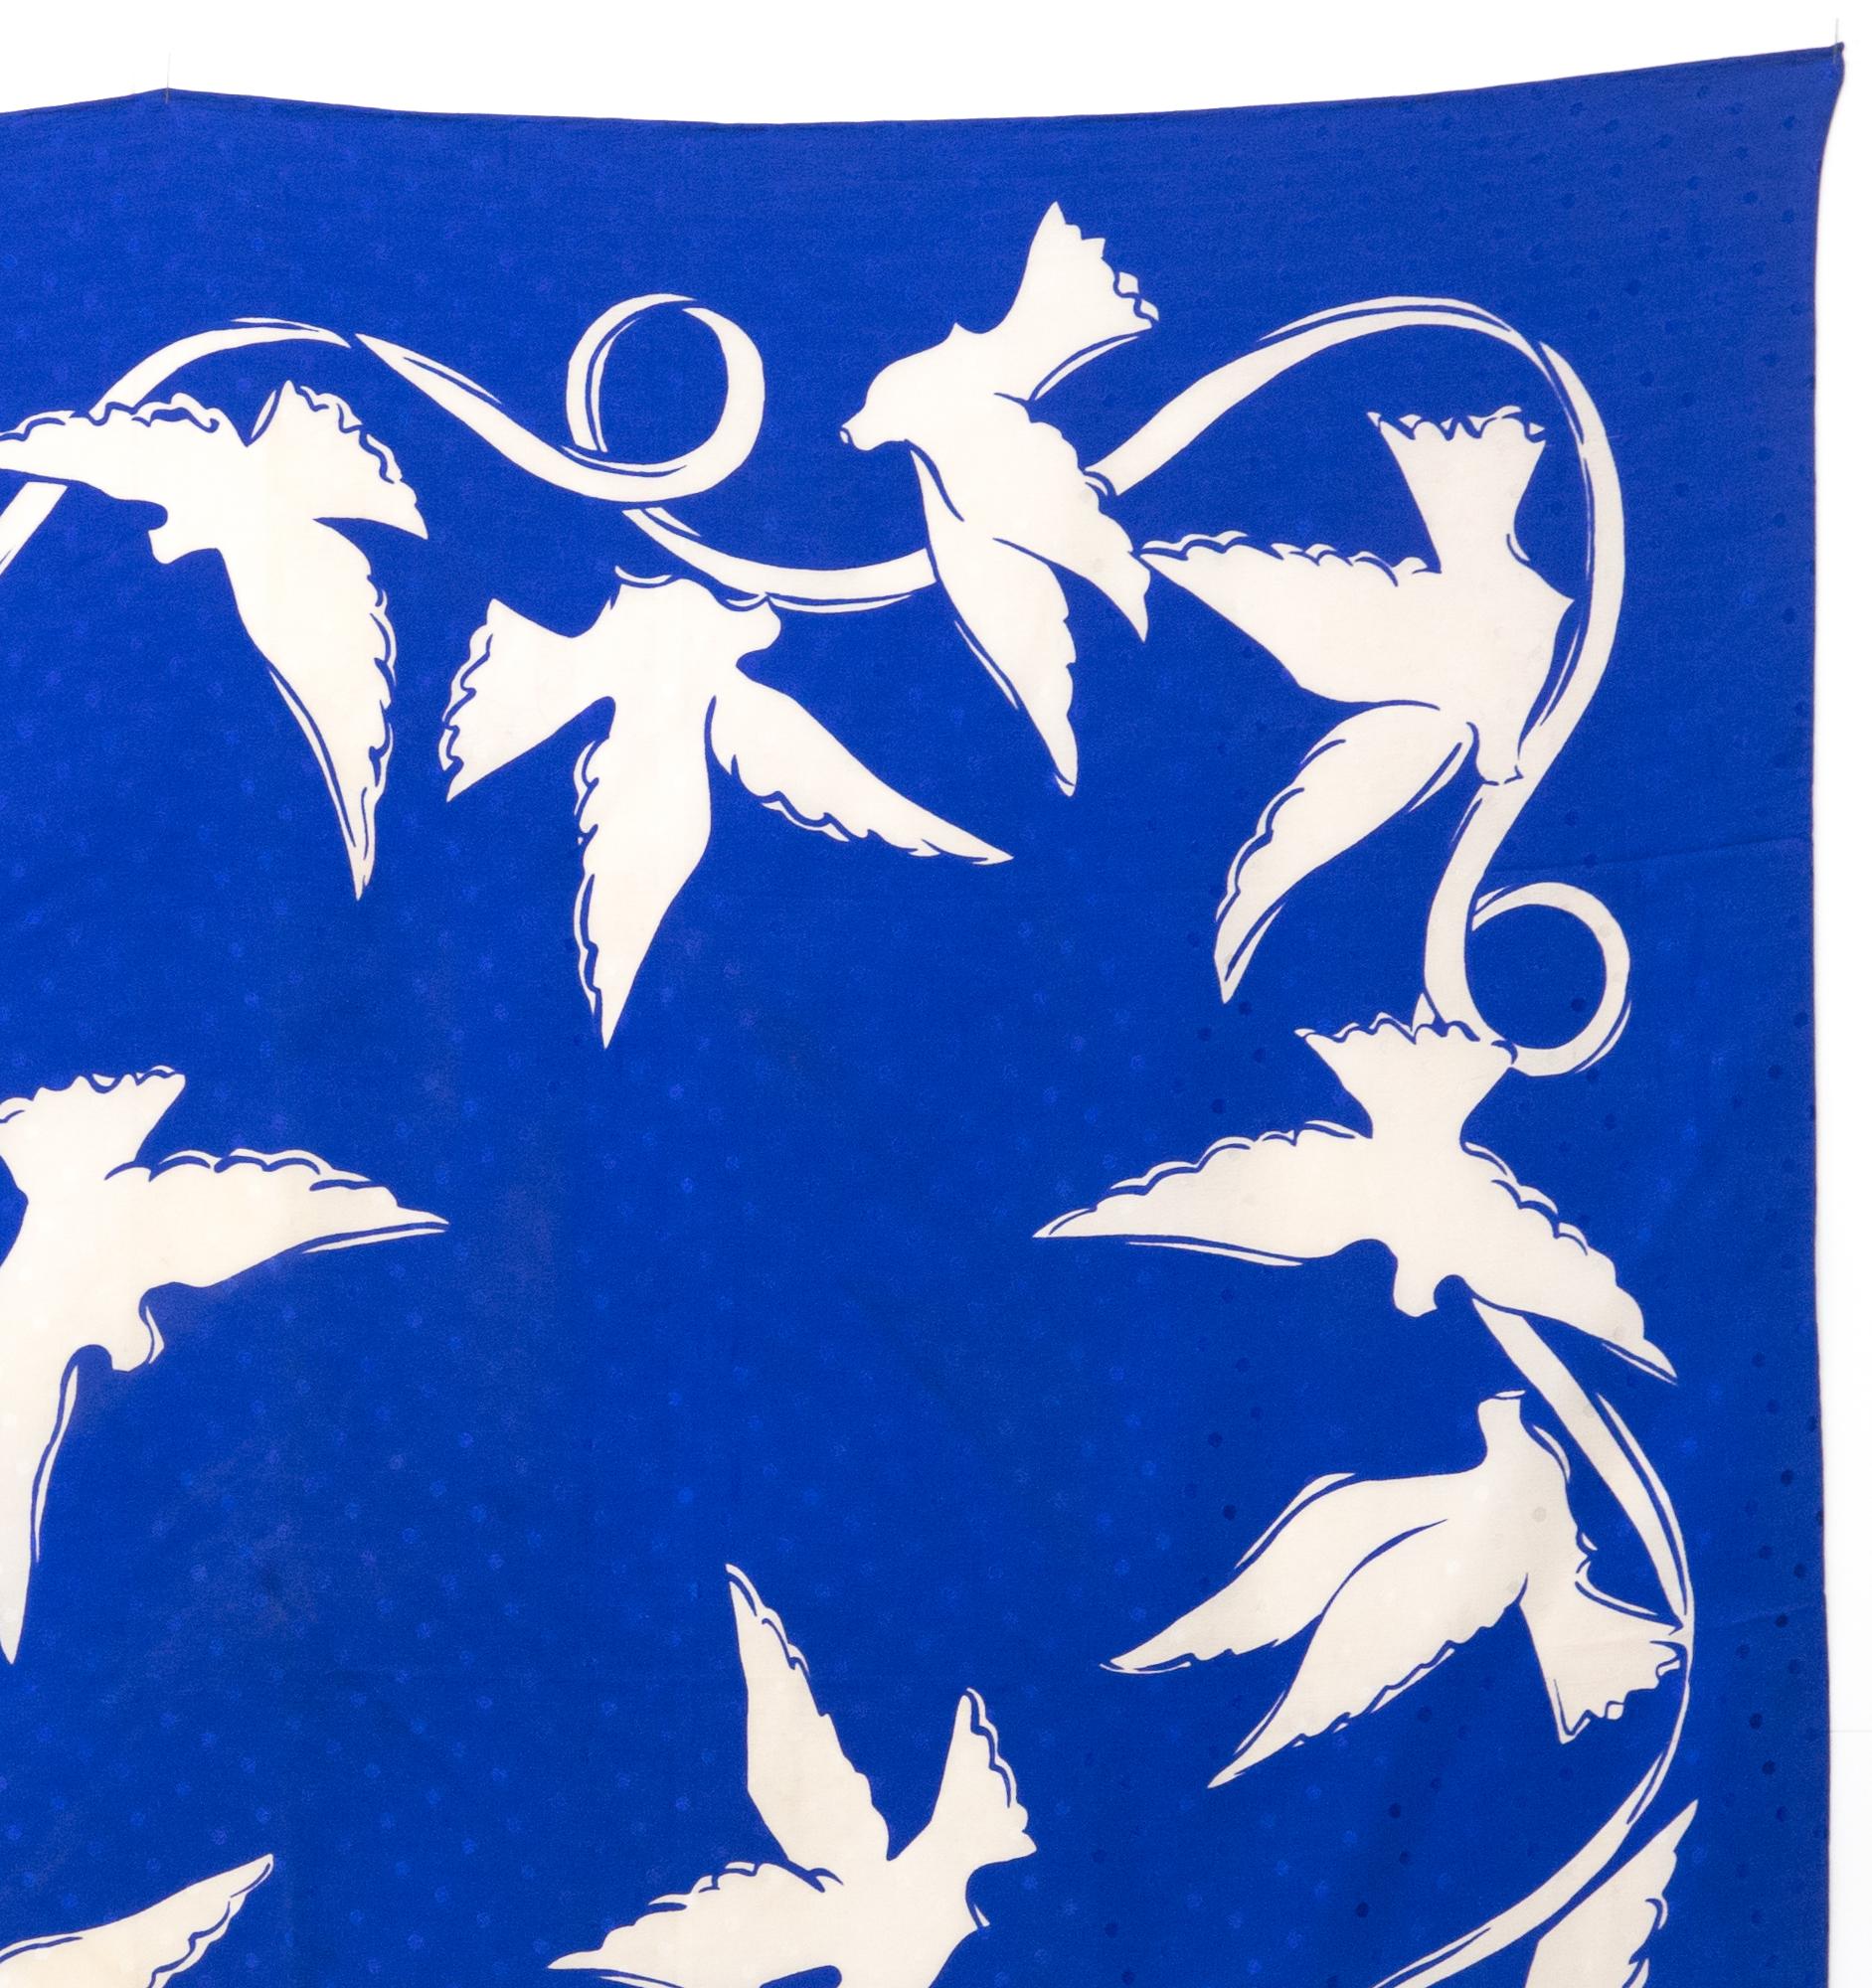 YSL Yves Saint Laurent White Doves Silk Scarf In Good Condition For Sale In Paris, FR